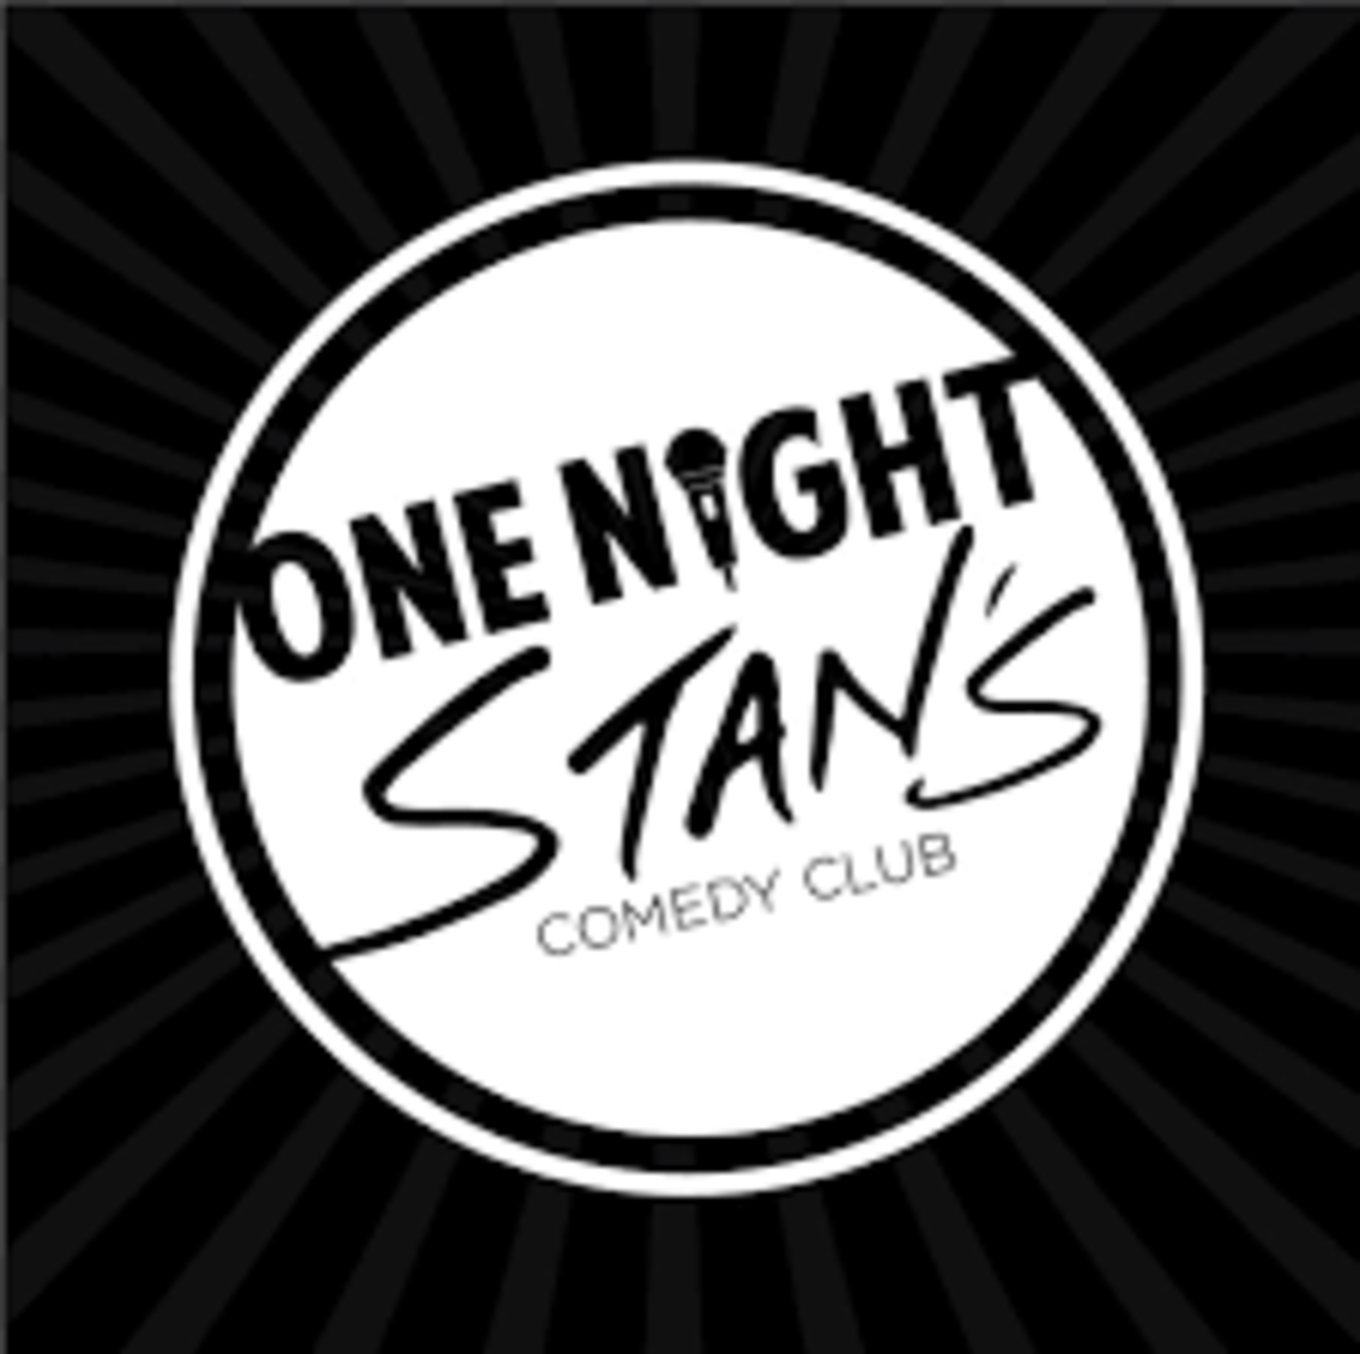 one night stans comedy club waterford mi comedy show davidharrislive